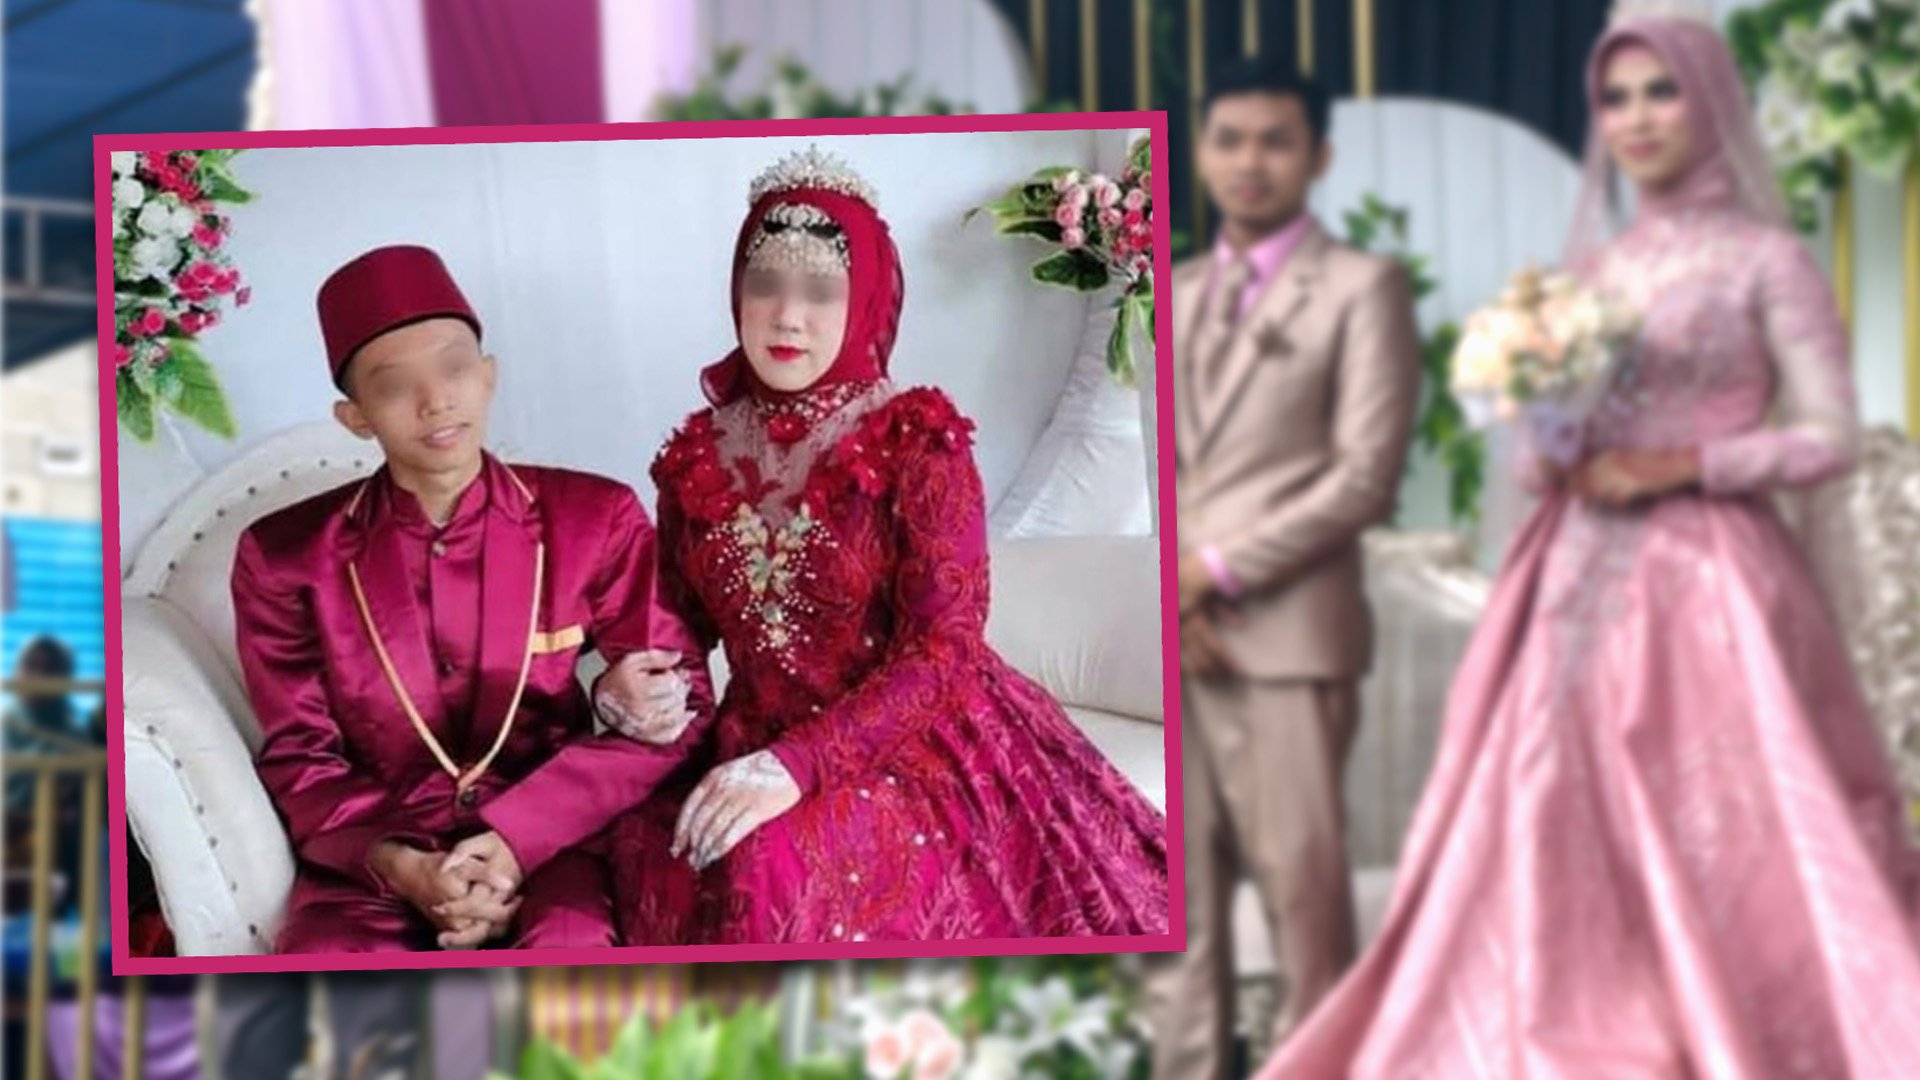 A man from Indonesia uncovers that the person he married following a year of courtship is, in reality, a male individual attempting to deceive him for financial gain. Photo: SCMP composite/Shutterstock/TikTok